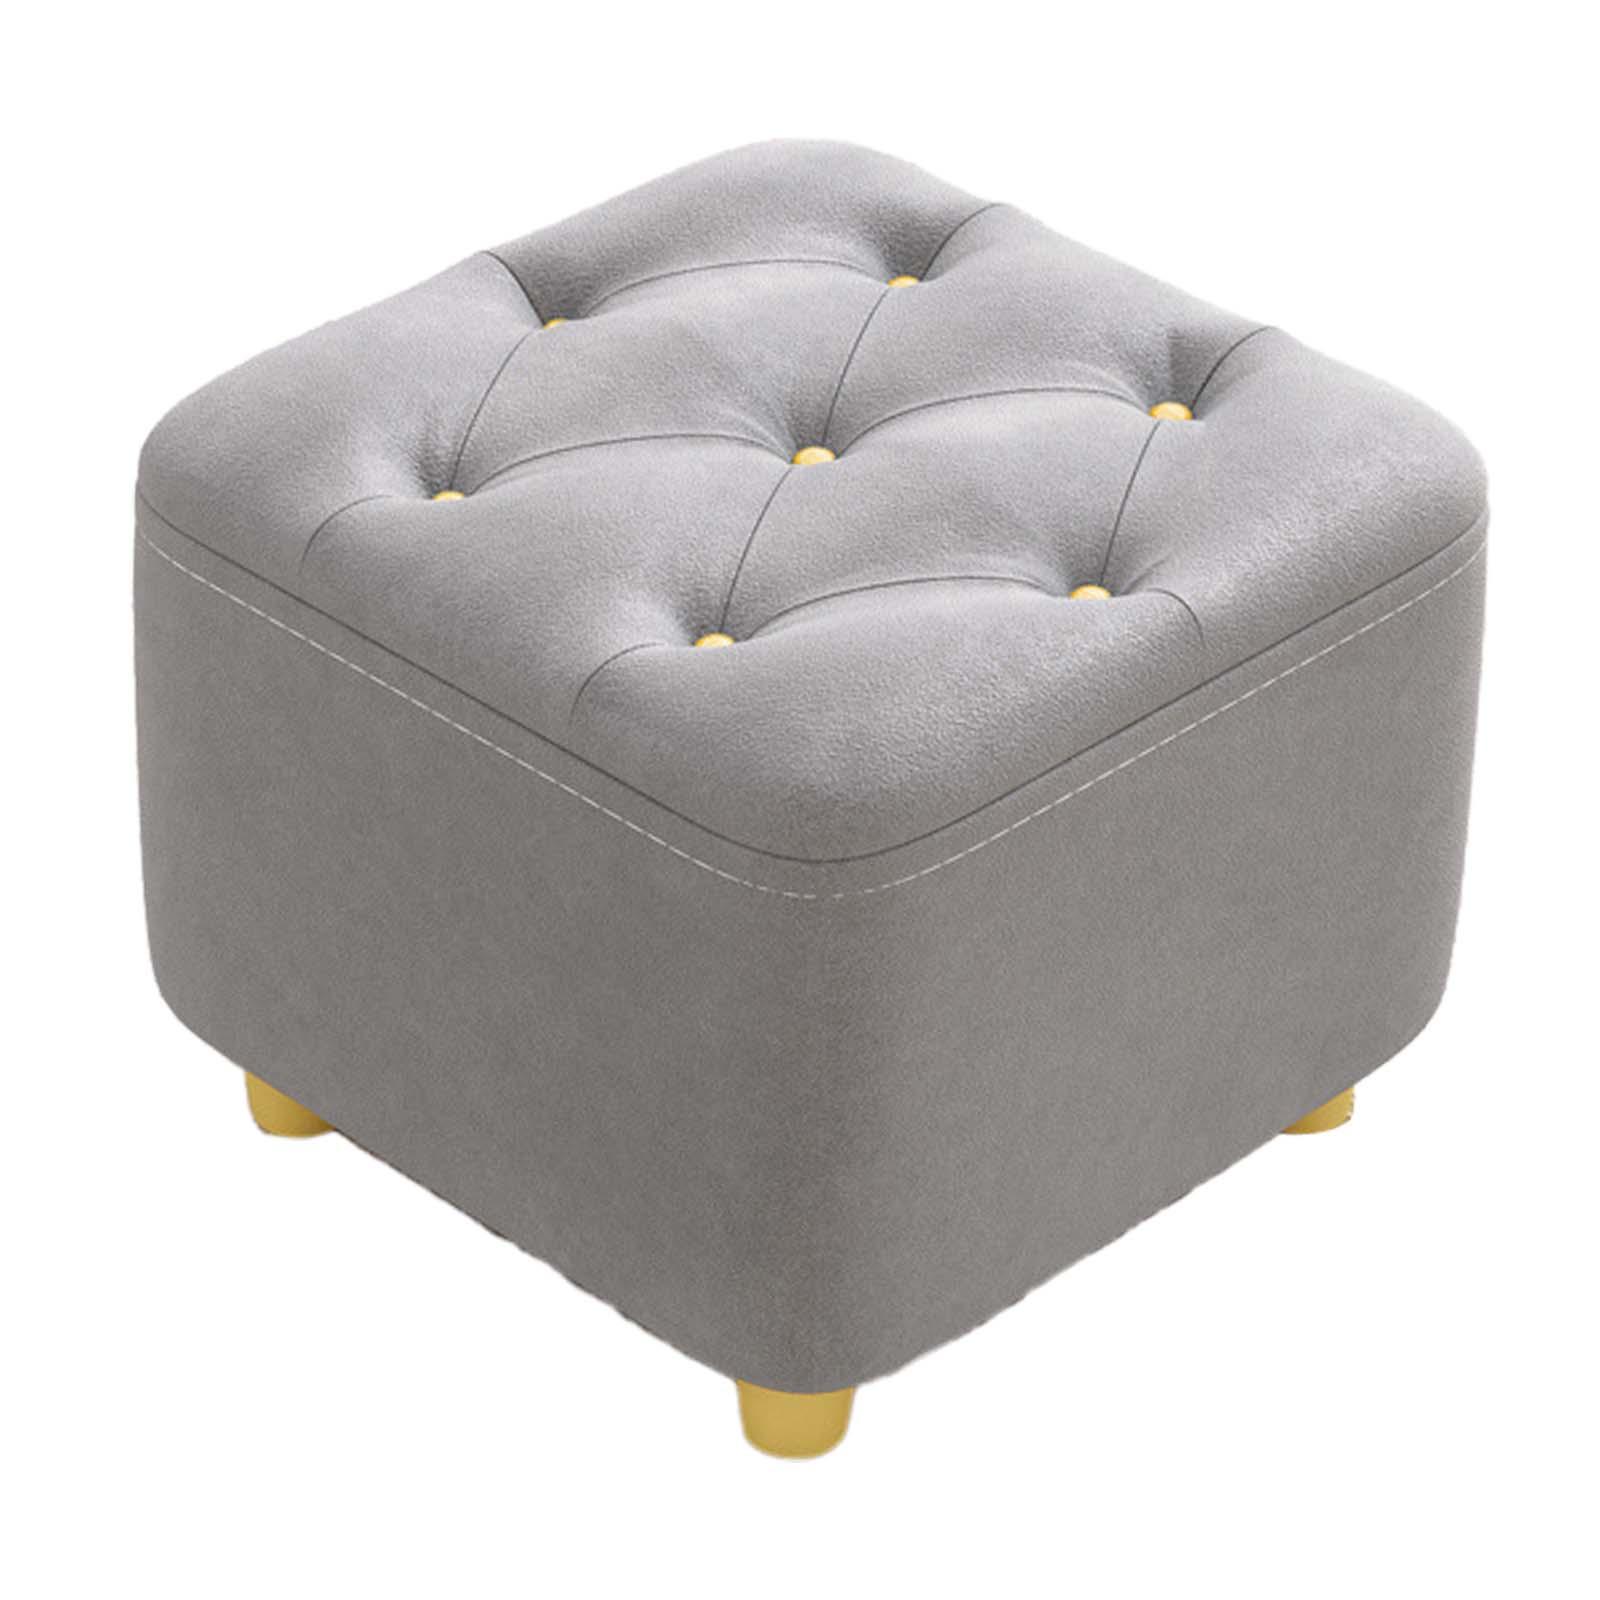 Square Footstool Foot Stool Comfortable Stepstool Creative Ottoman Stool Footrest for Living Room Dressing Room Bedroom Couch gray - image 2 of 8